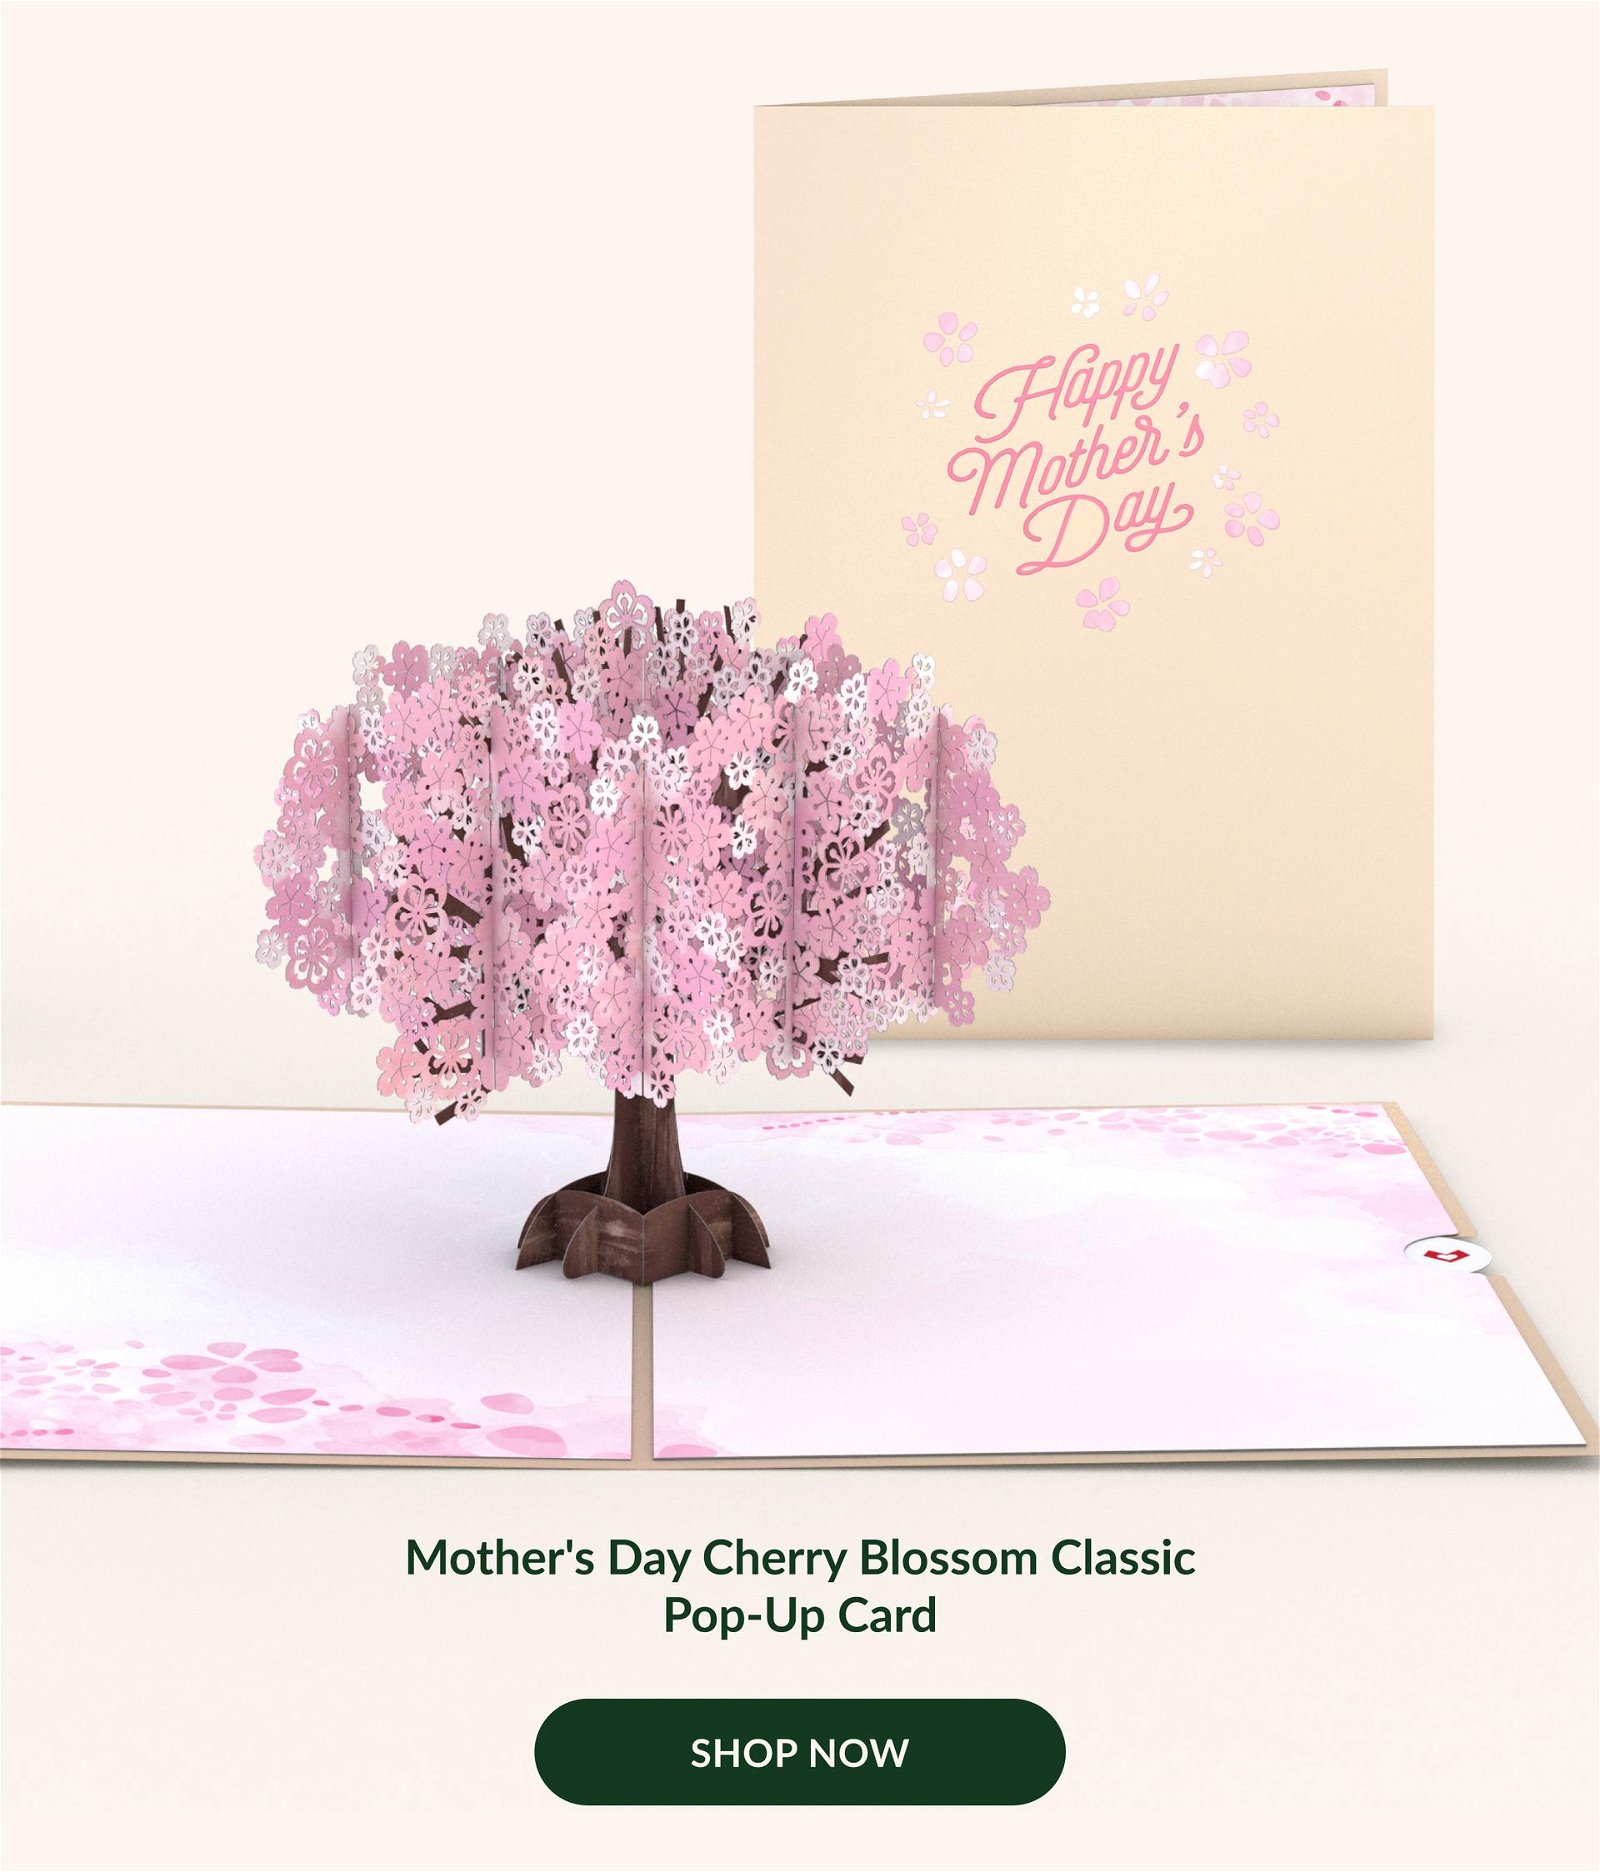 Mother's Day Cherry Blossom Classic Pop-Up Card | SHOP NOW